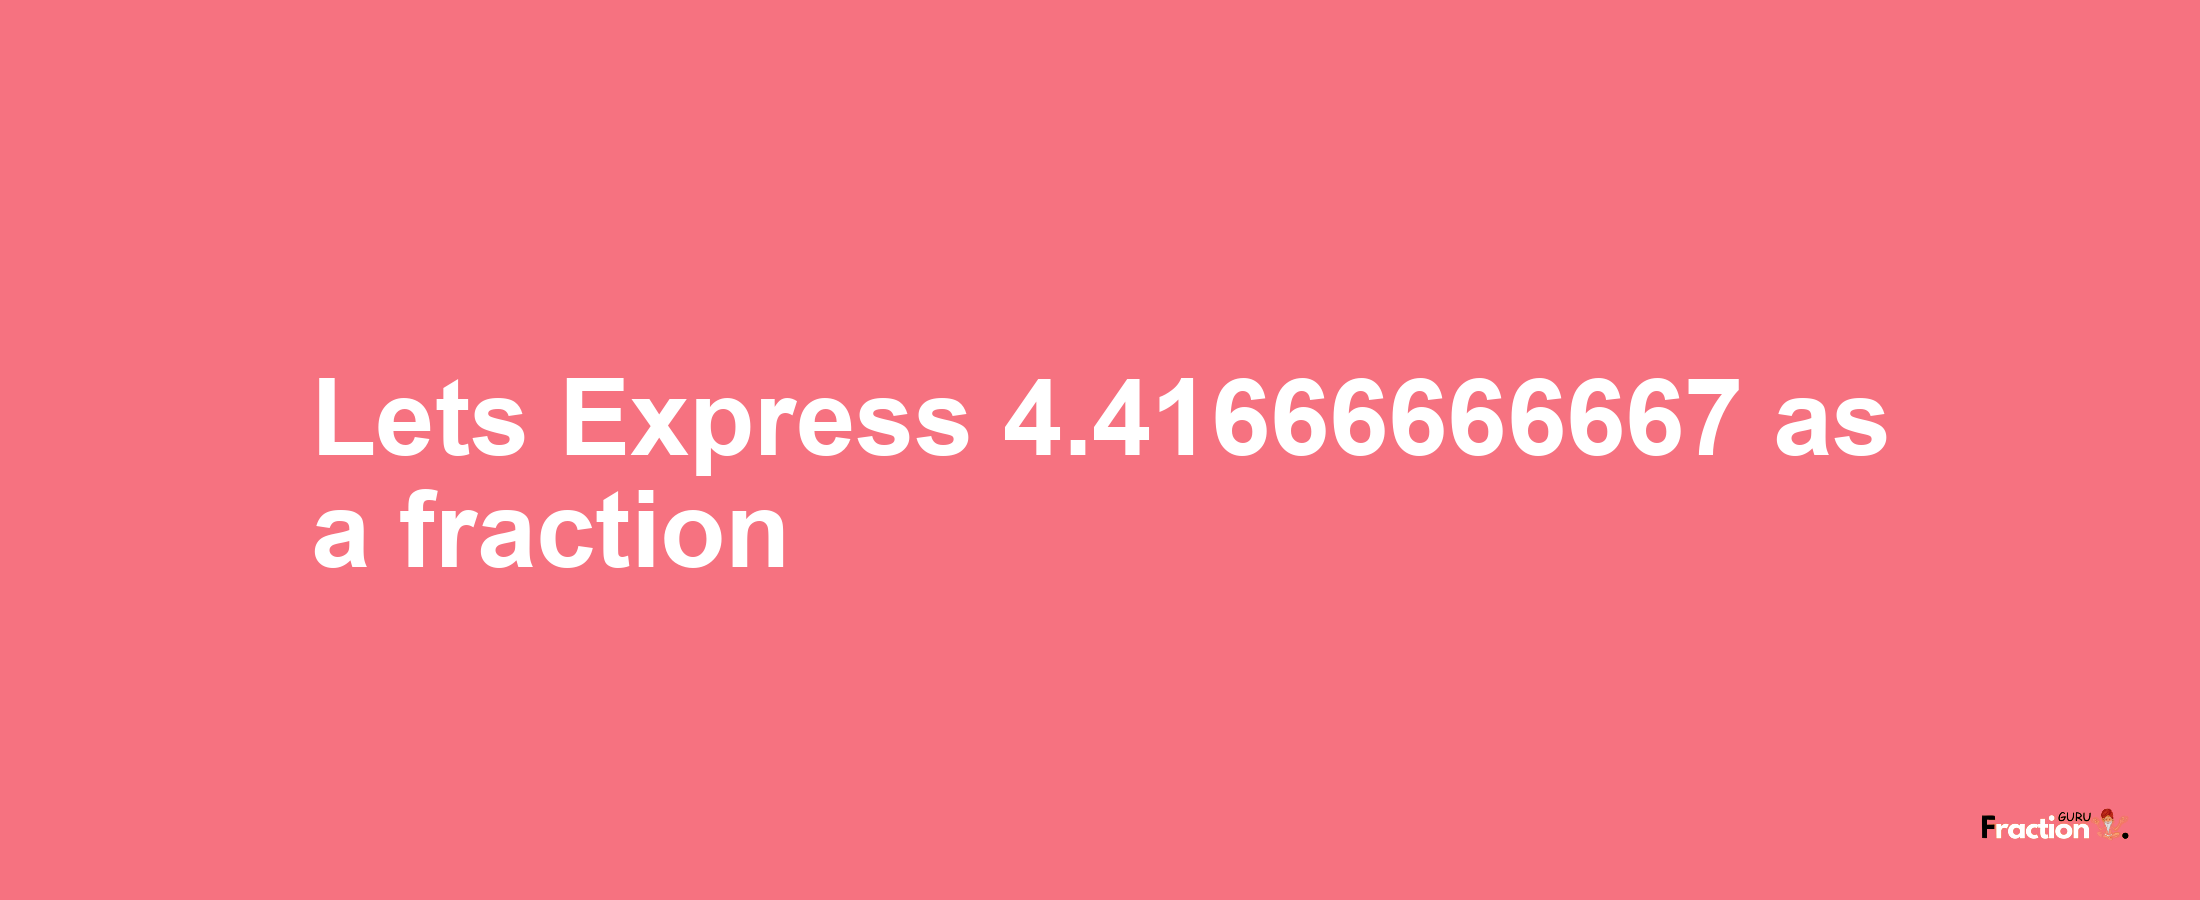 Lets Express 4.41666666667 as afraction